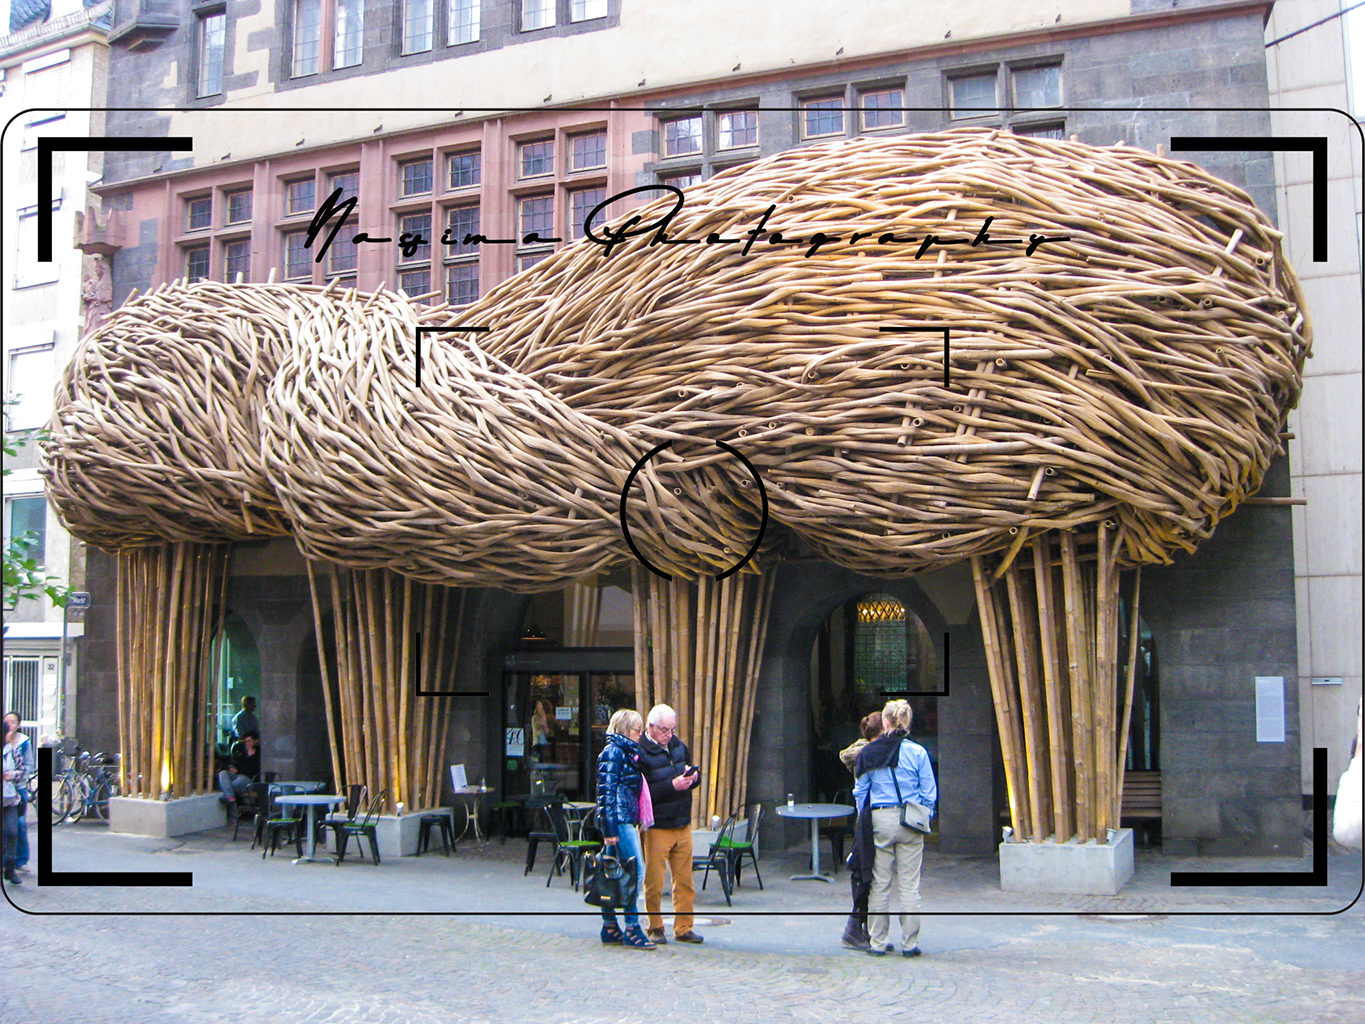 café in frankfurt am main with a netting of bamboo 